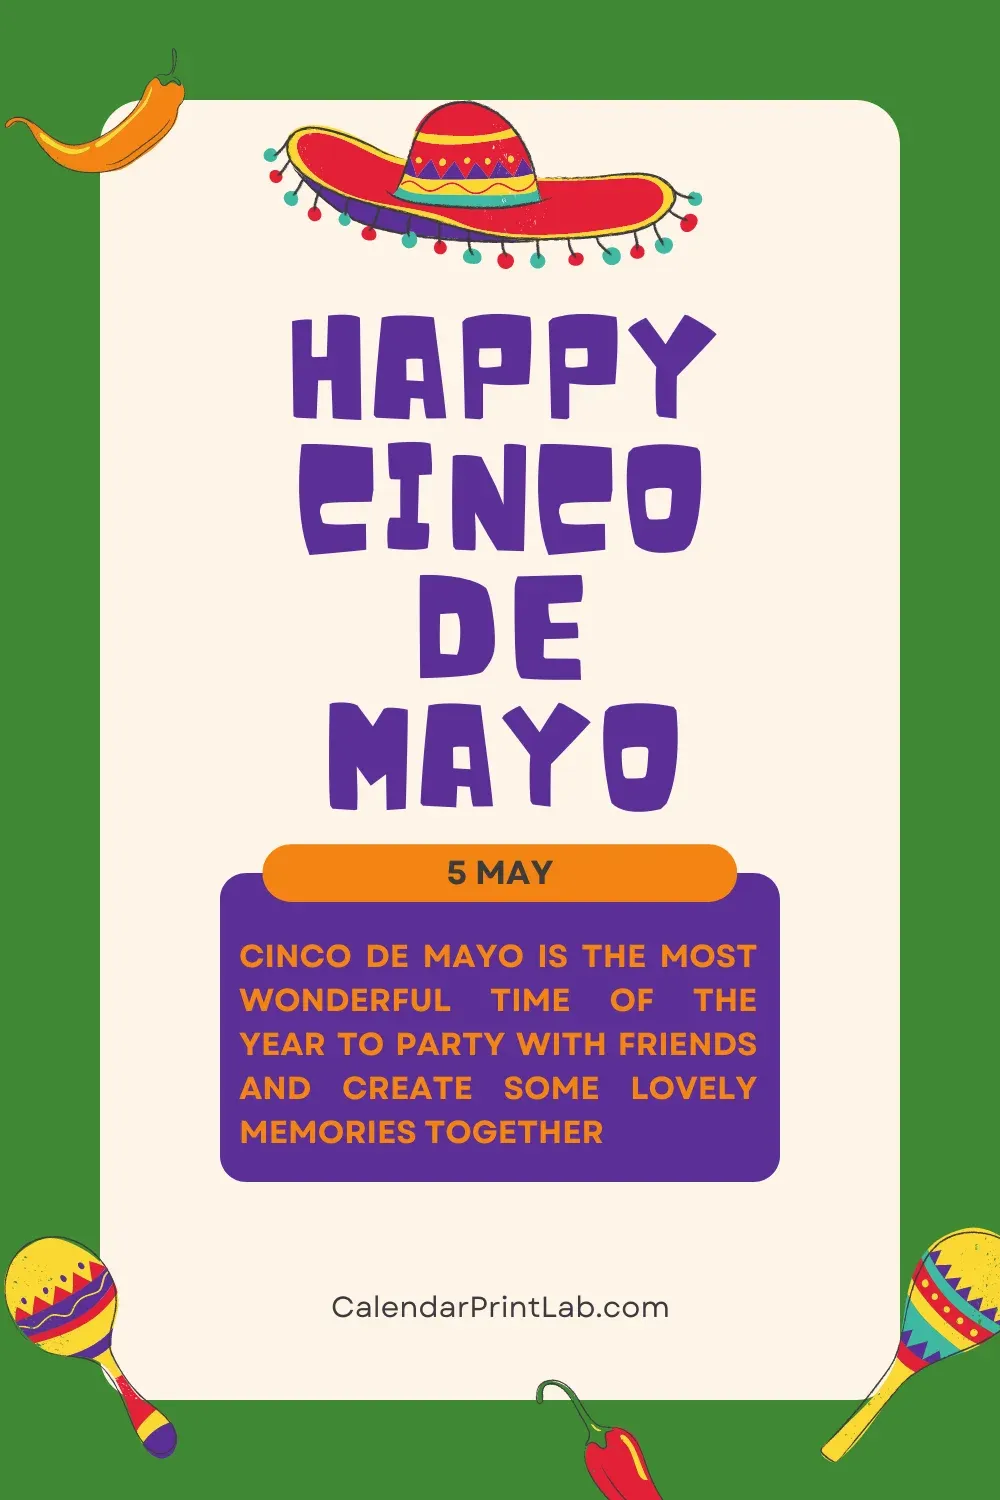 Cinco de Mayo Wishes and Images